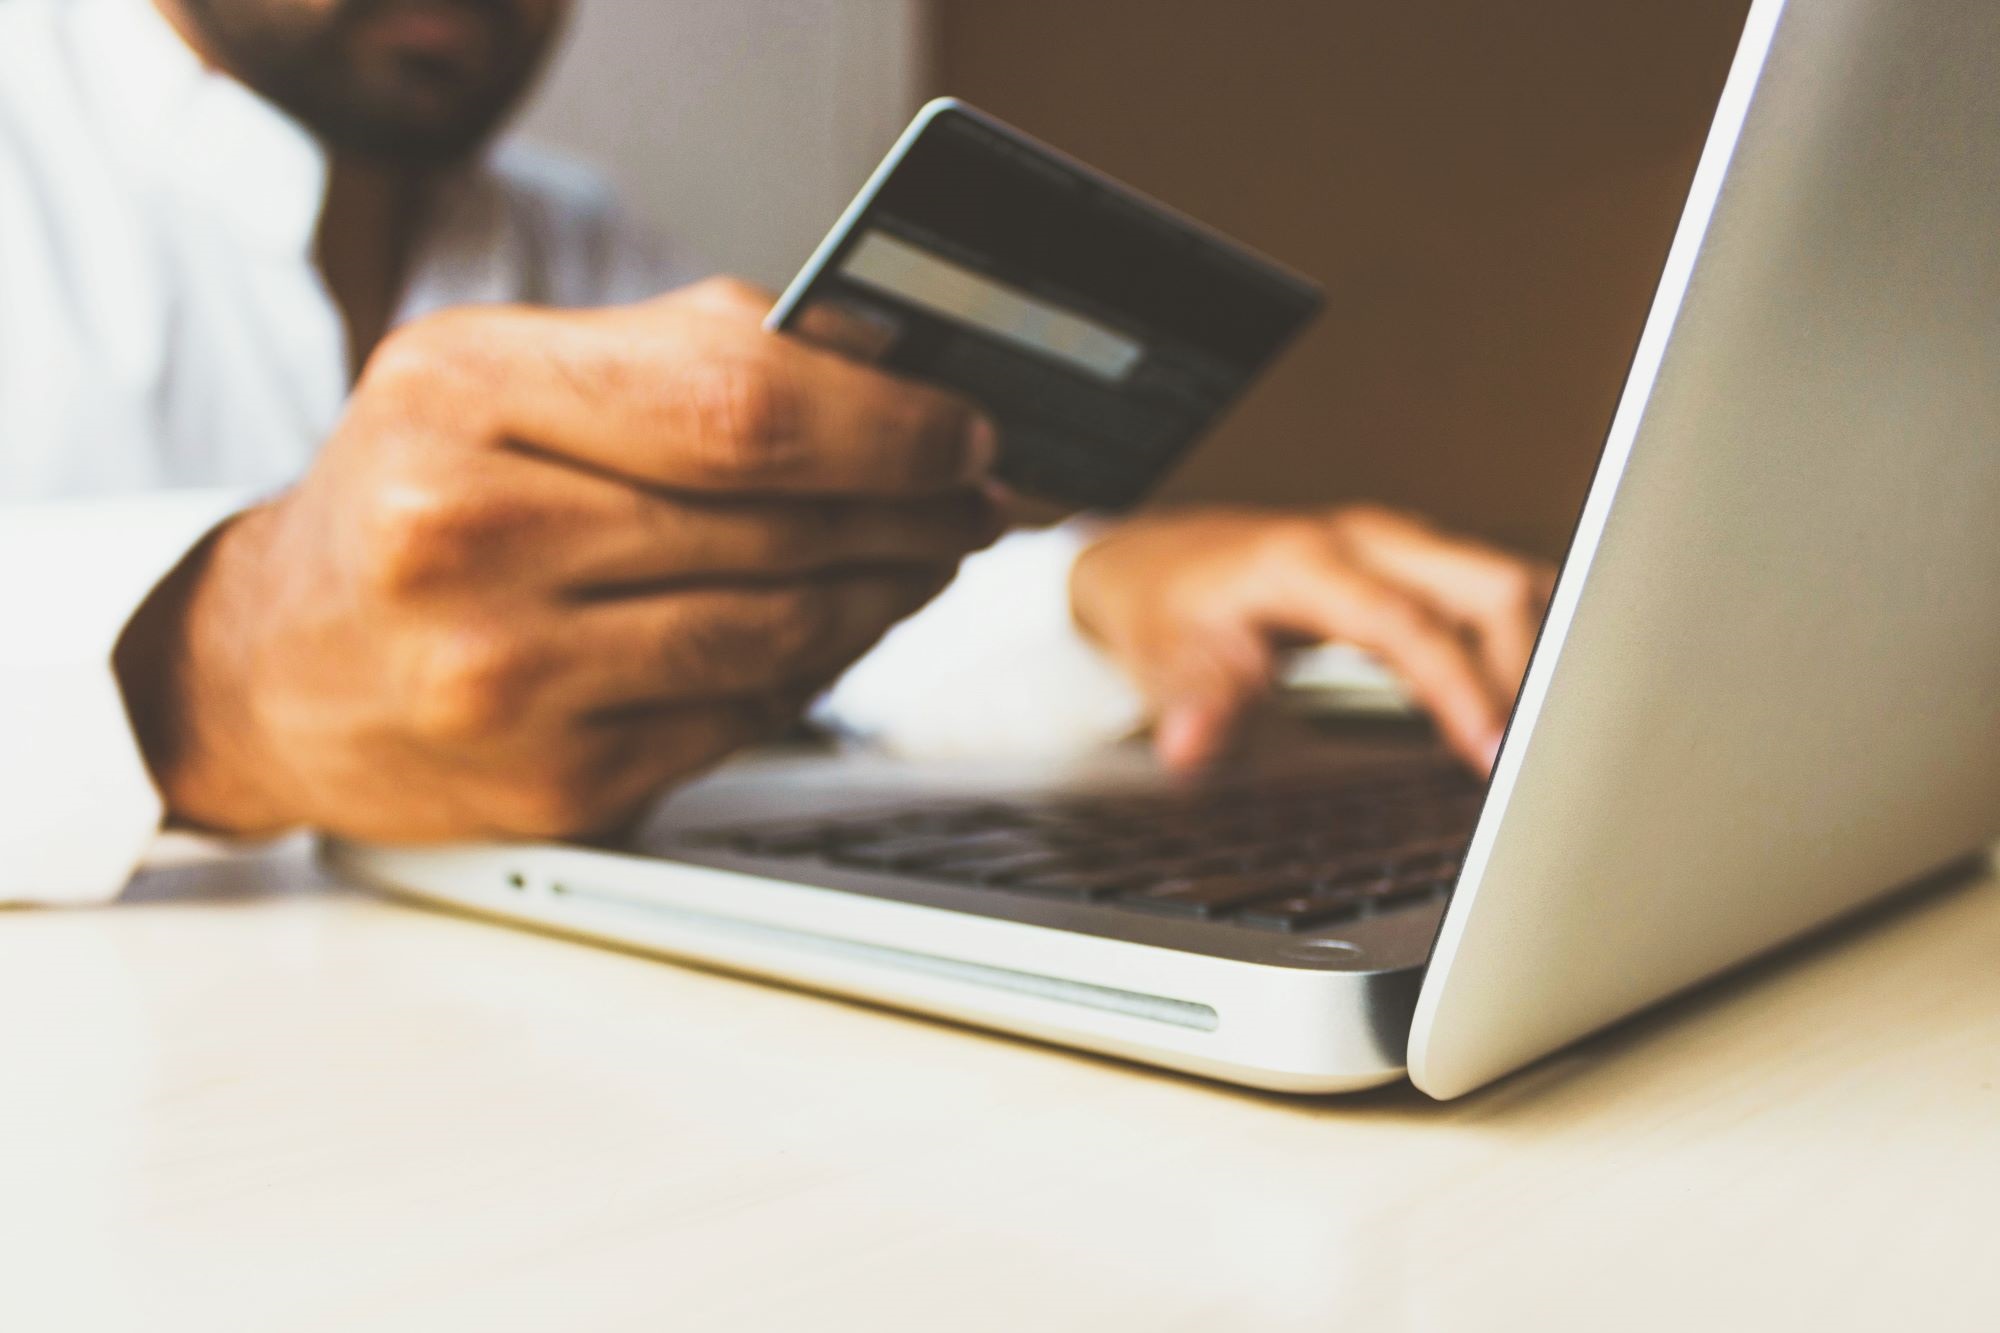 Are you more likely to buy clothing or groceries online? New report outlines SA's spending habits